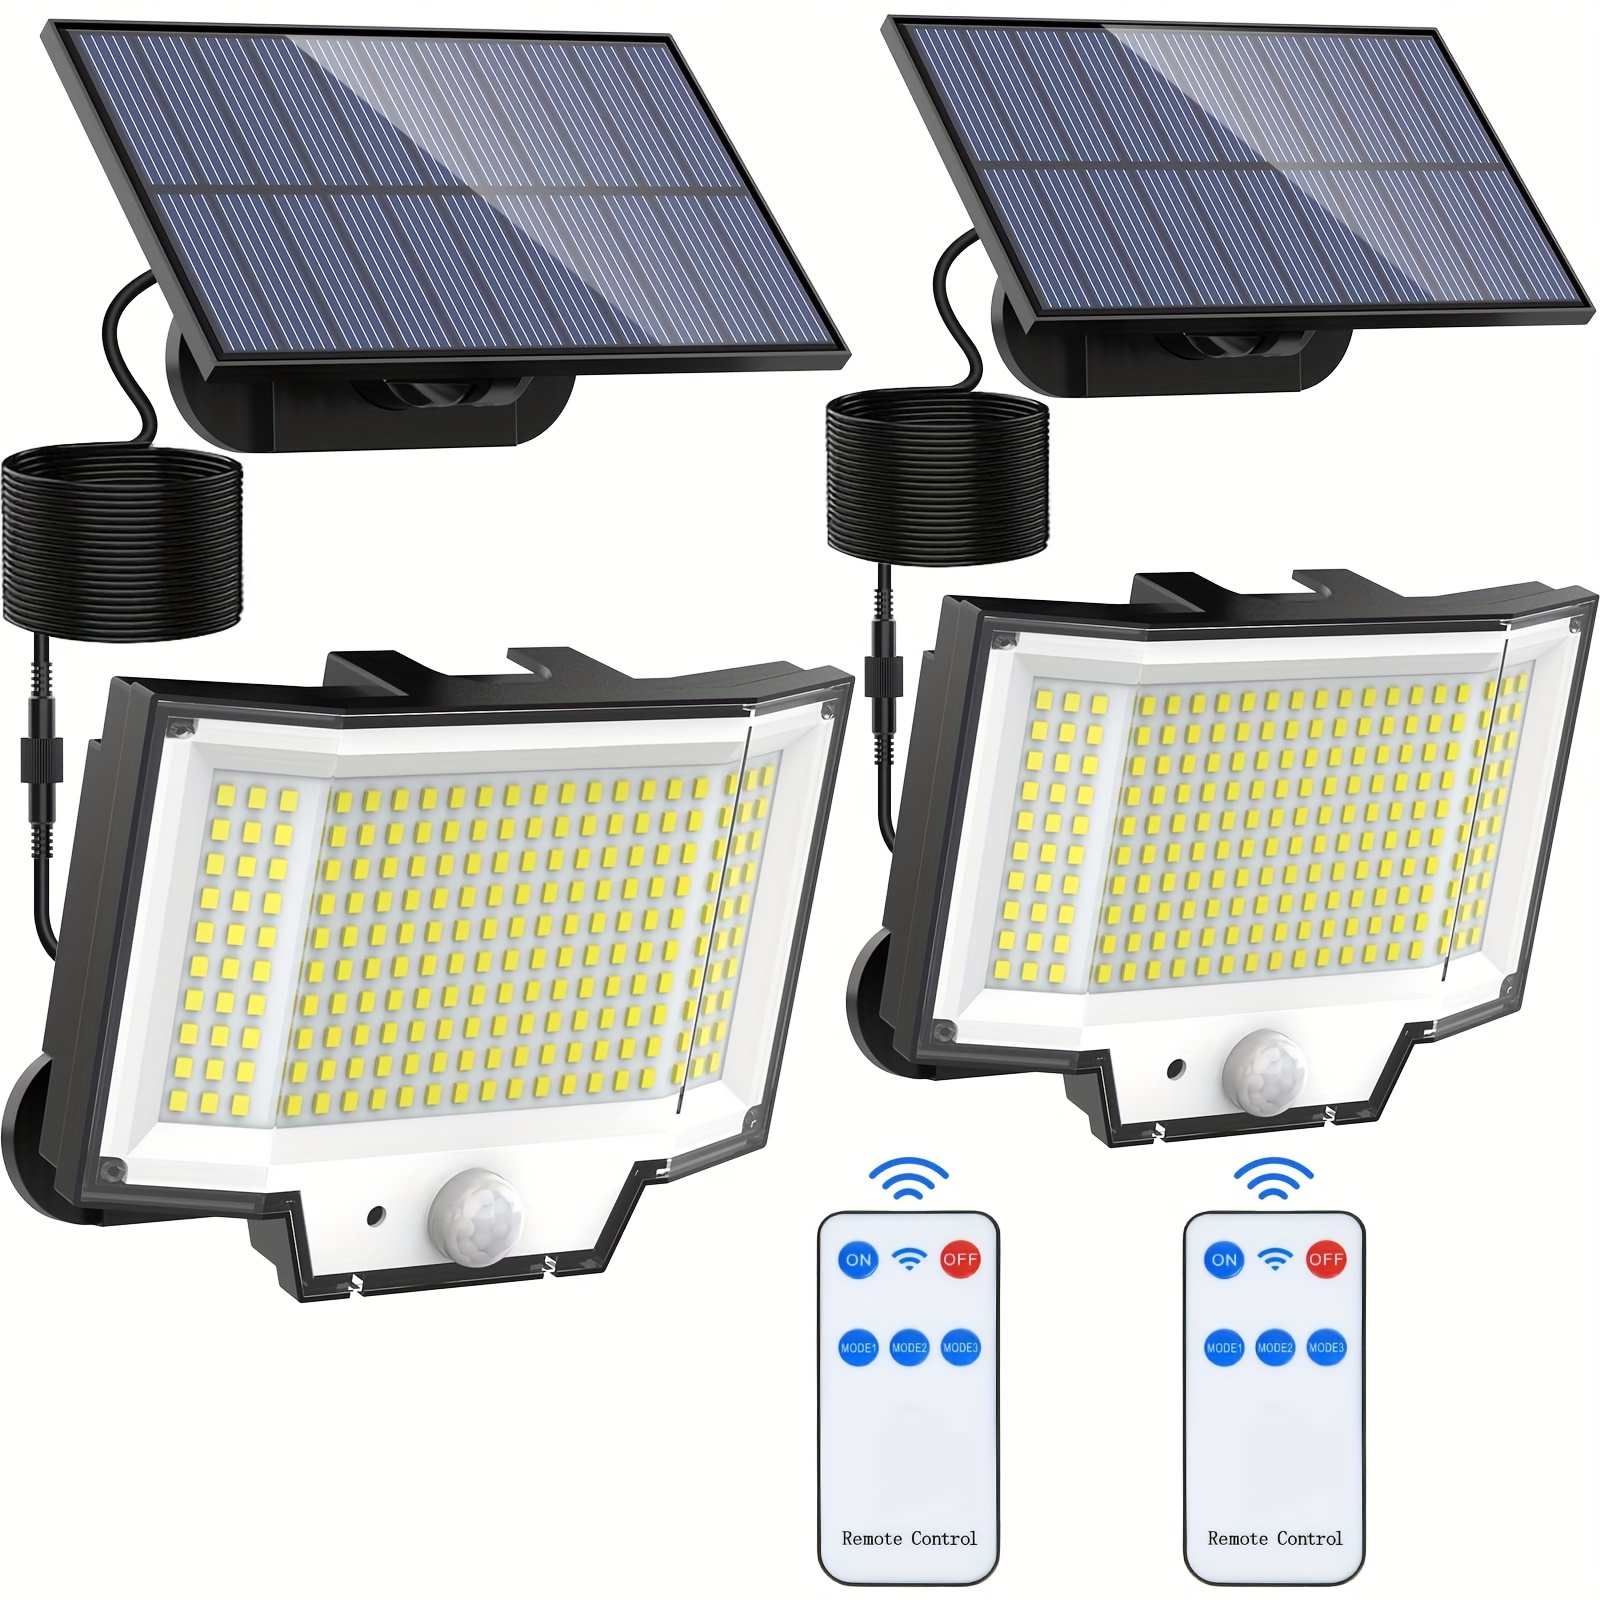 

1/2 Packs Solar Motion Sensor Lights Outdoor With 200 Bright Led, Remote Control, Individual Panels, 16.4 Ft Cable, Dusk To Dawn Lighting, Safe Solar Flood Lights For Outdoor Porch Yard Shed Wall